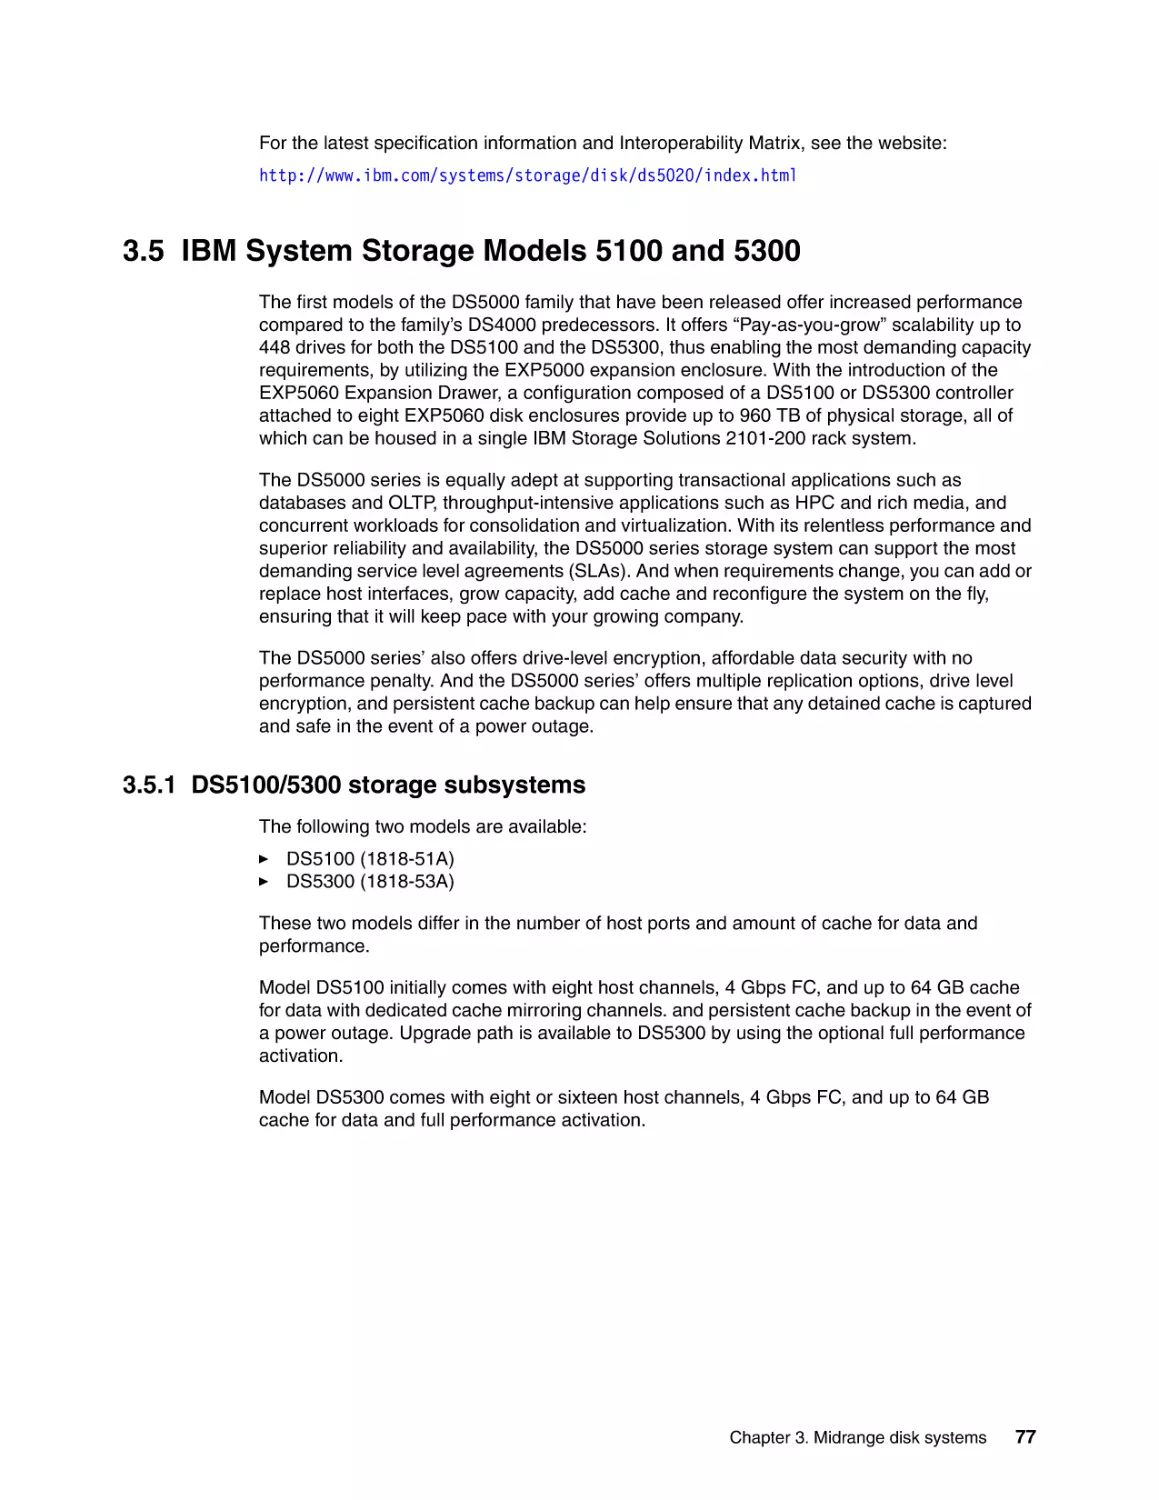 3.5 IBM System Storage Models 5100 and 5300
3.5.1 DS5100/5300 storage subsystems